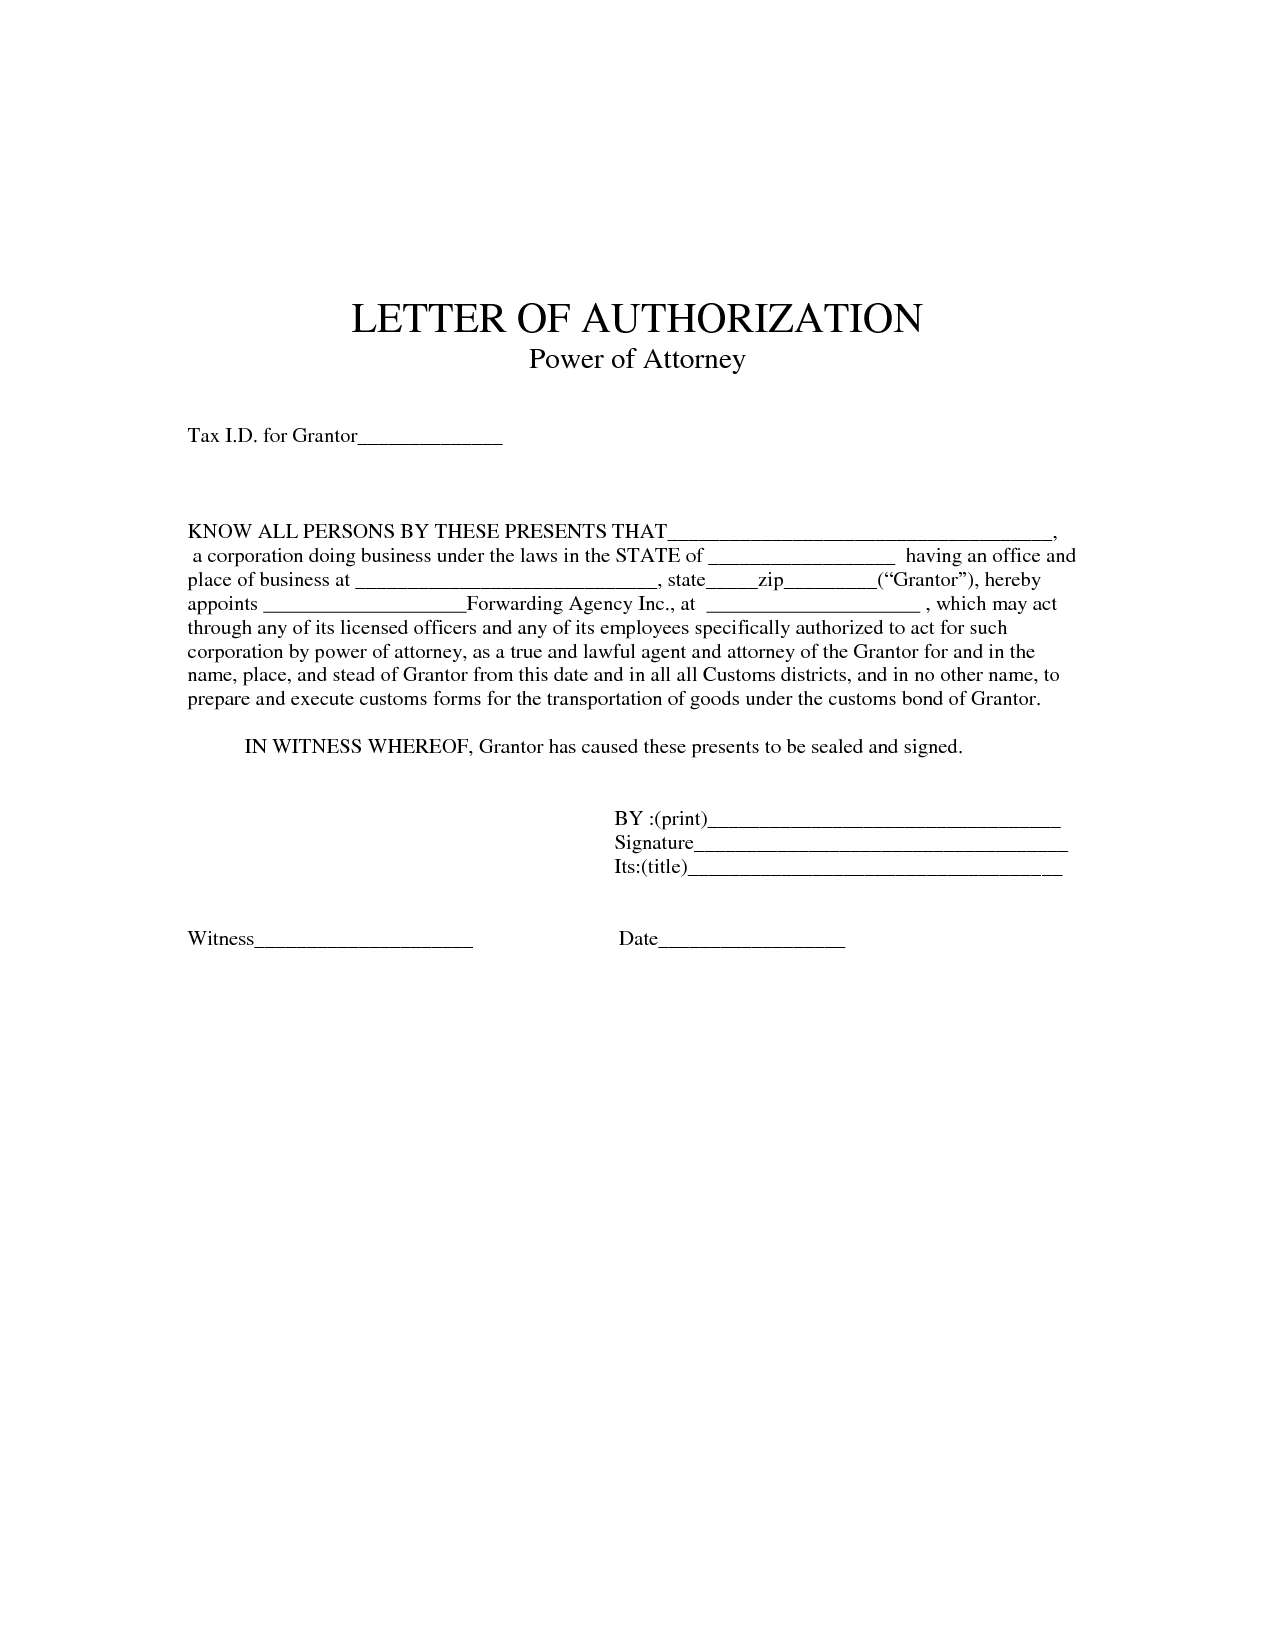 Power of Authorization Letter Free Sample | Authorization Letter